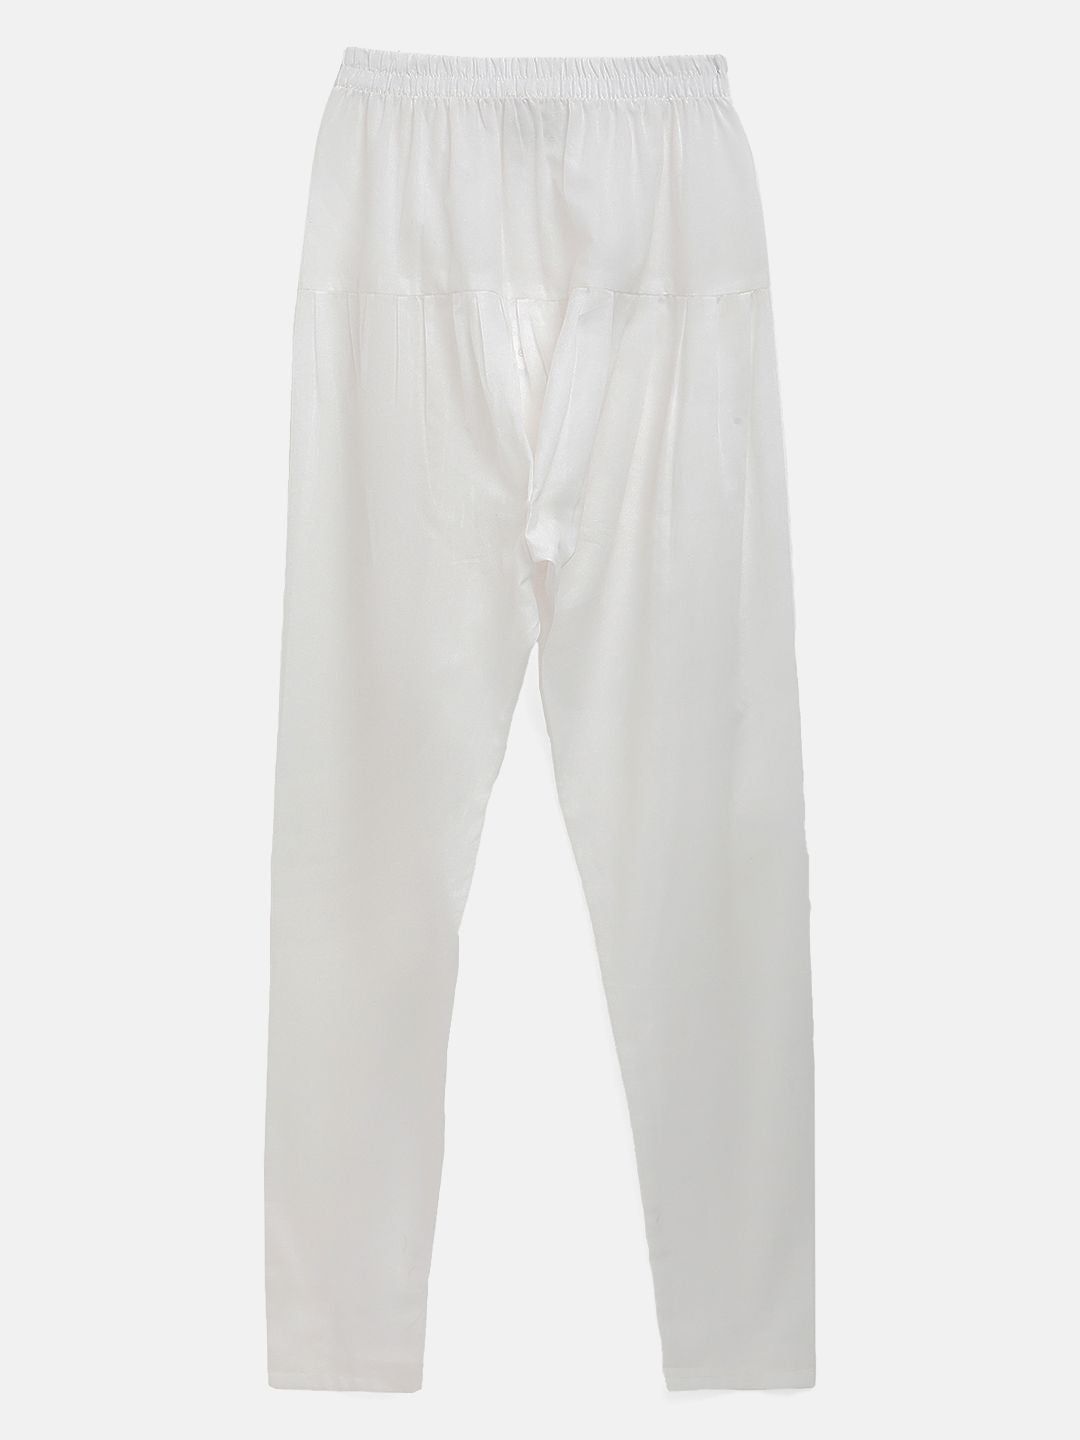 Buy Churidar Pants with Elasticated Waistband Online at Best